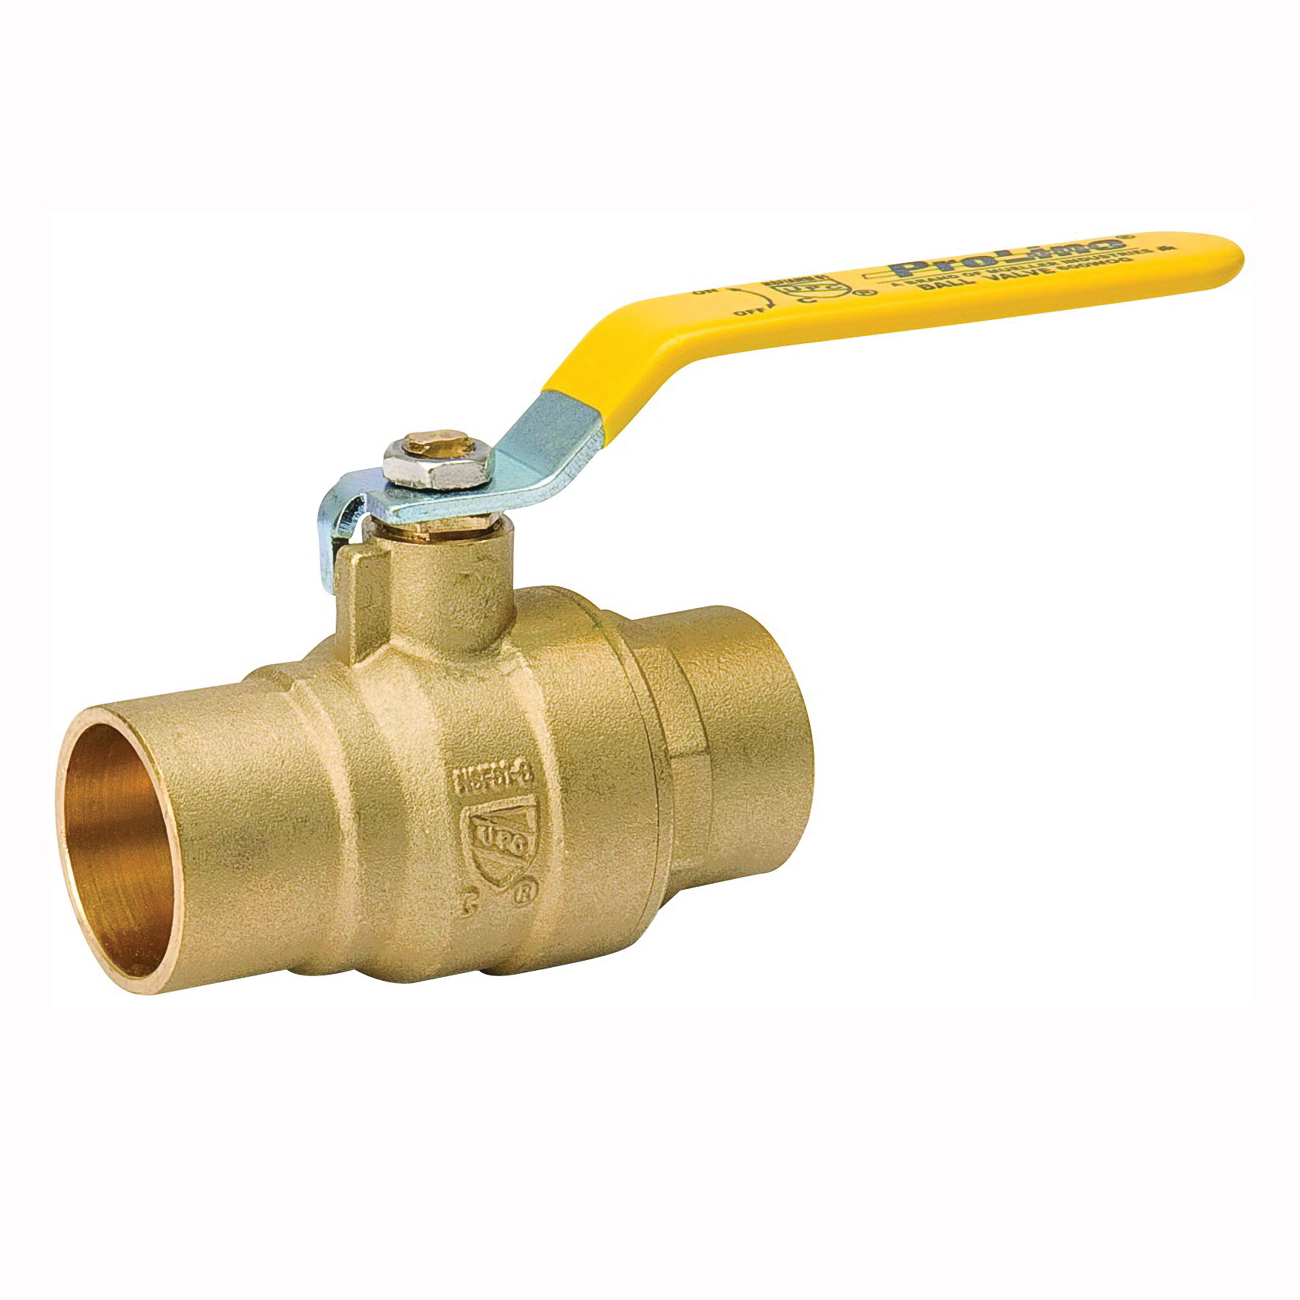 107-856NL Ball Valve, 1-1/4 in Connection, Compression, 600/125 psi Pressure, Manual Actuator, Brass Body